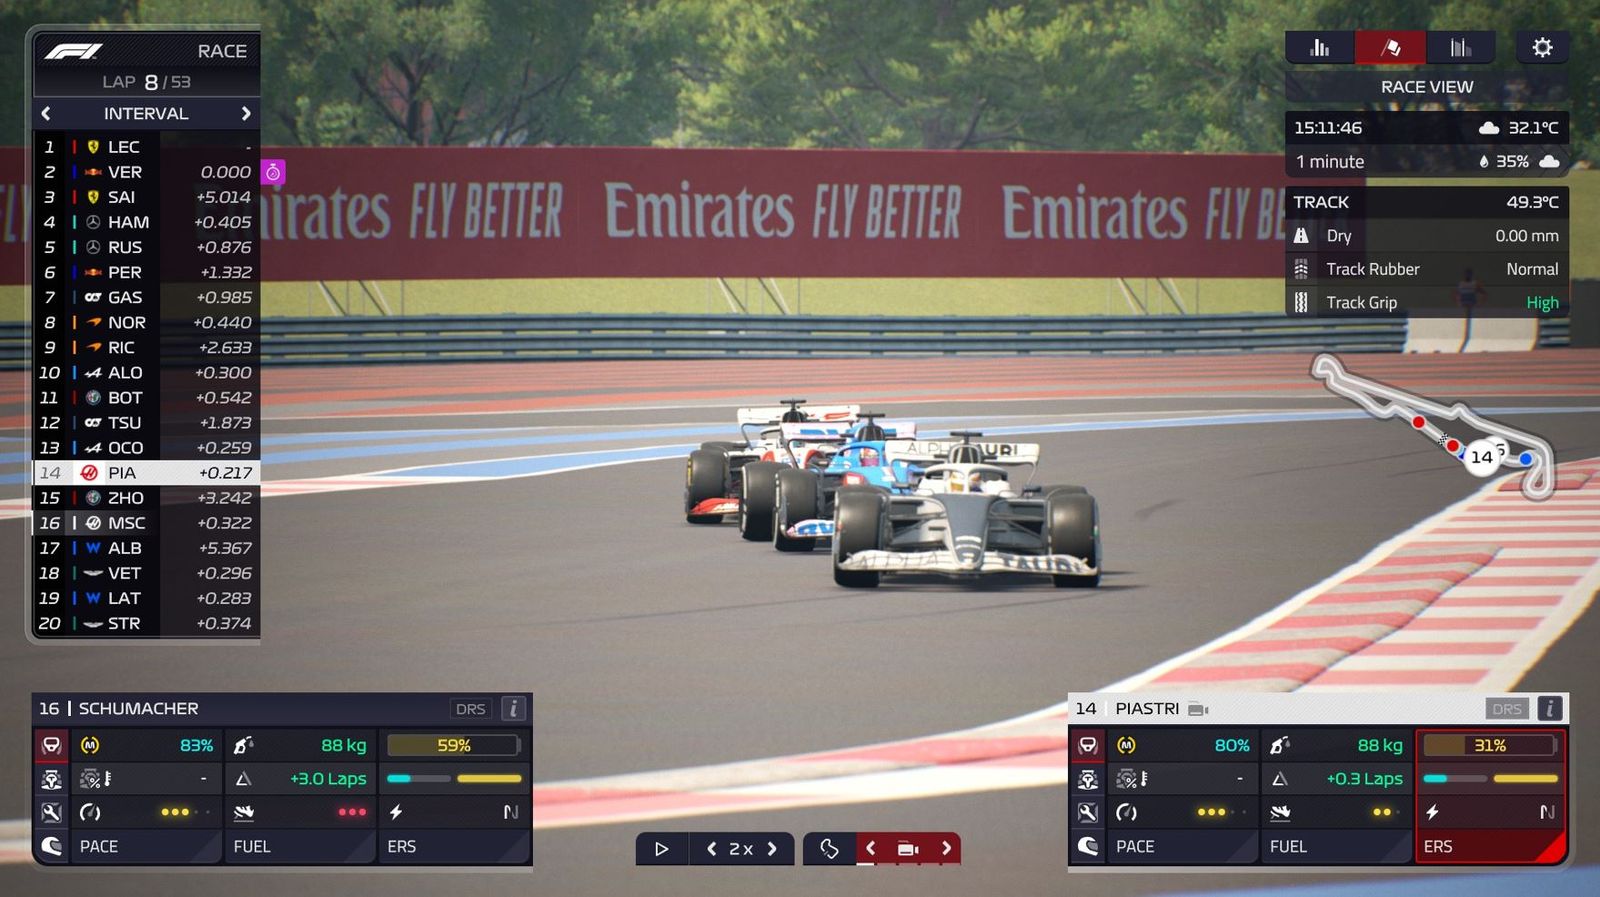 F1 Manager 2022 weather in race view